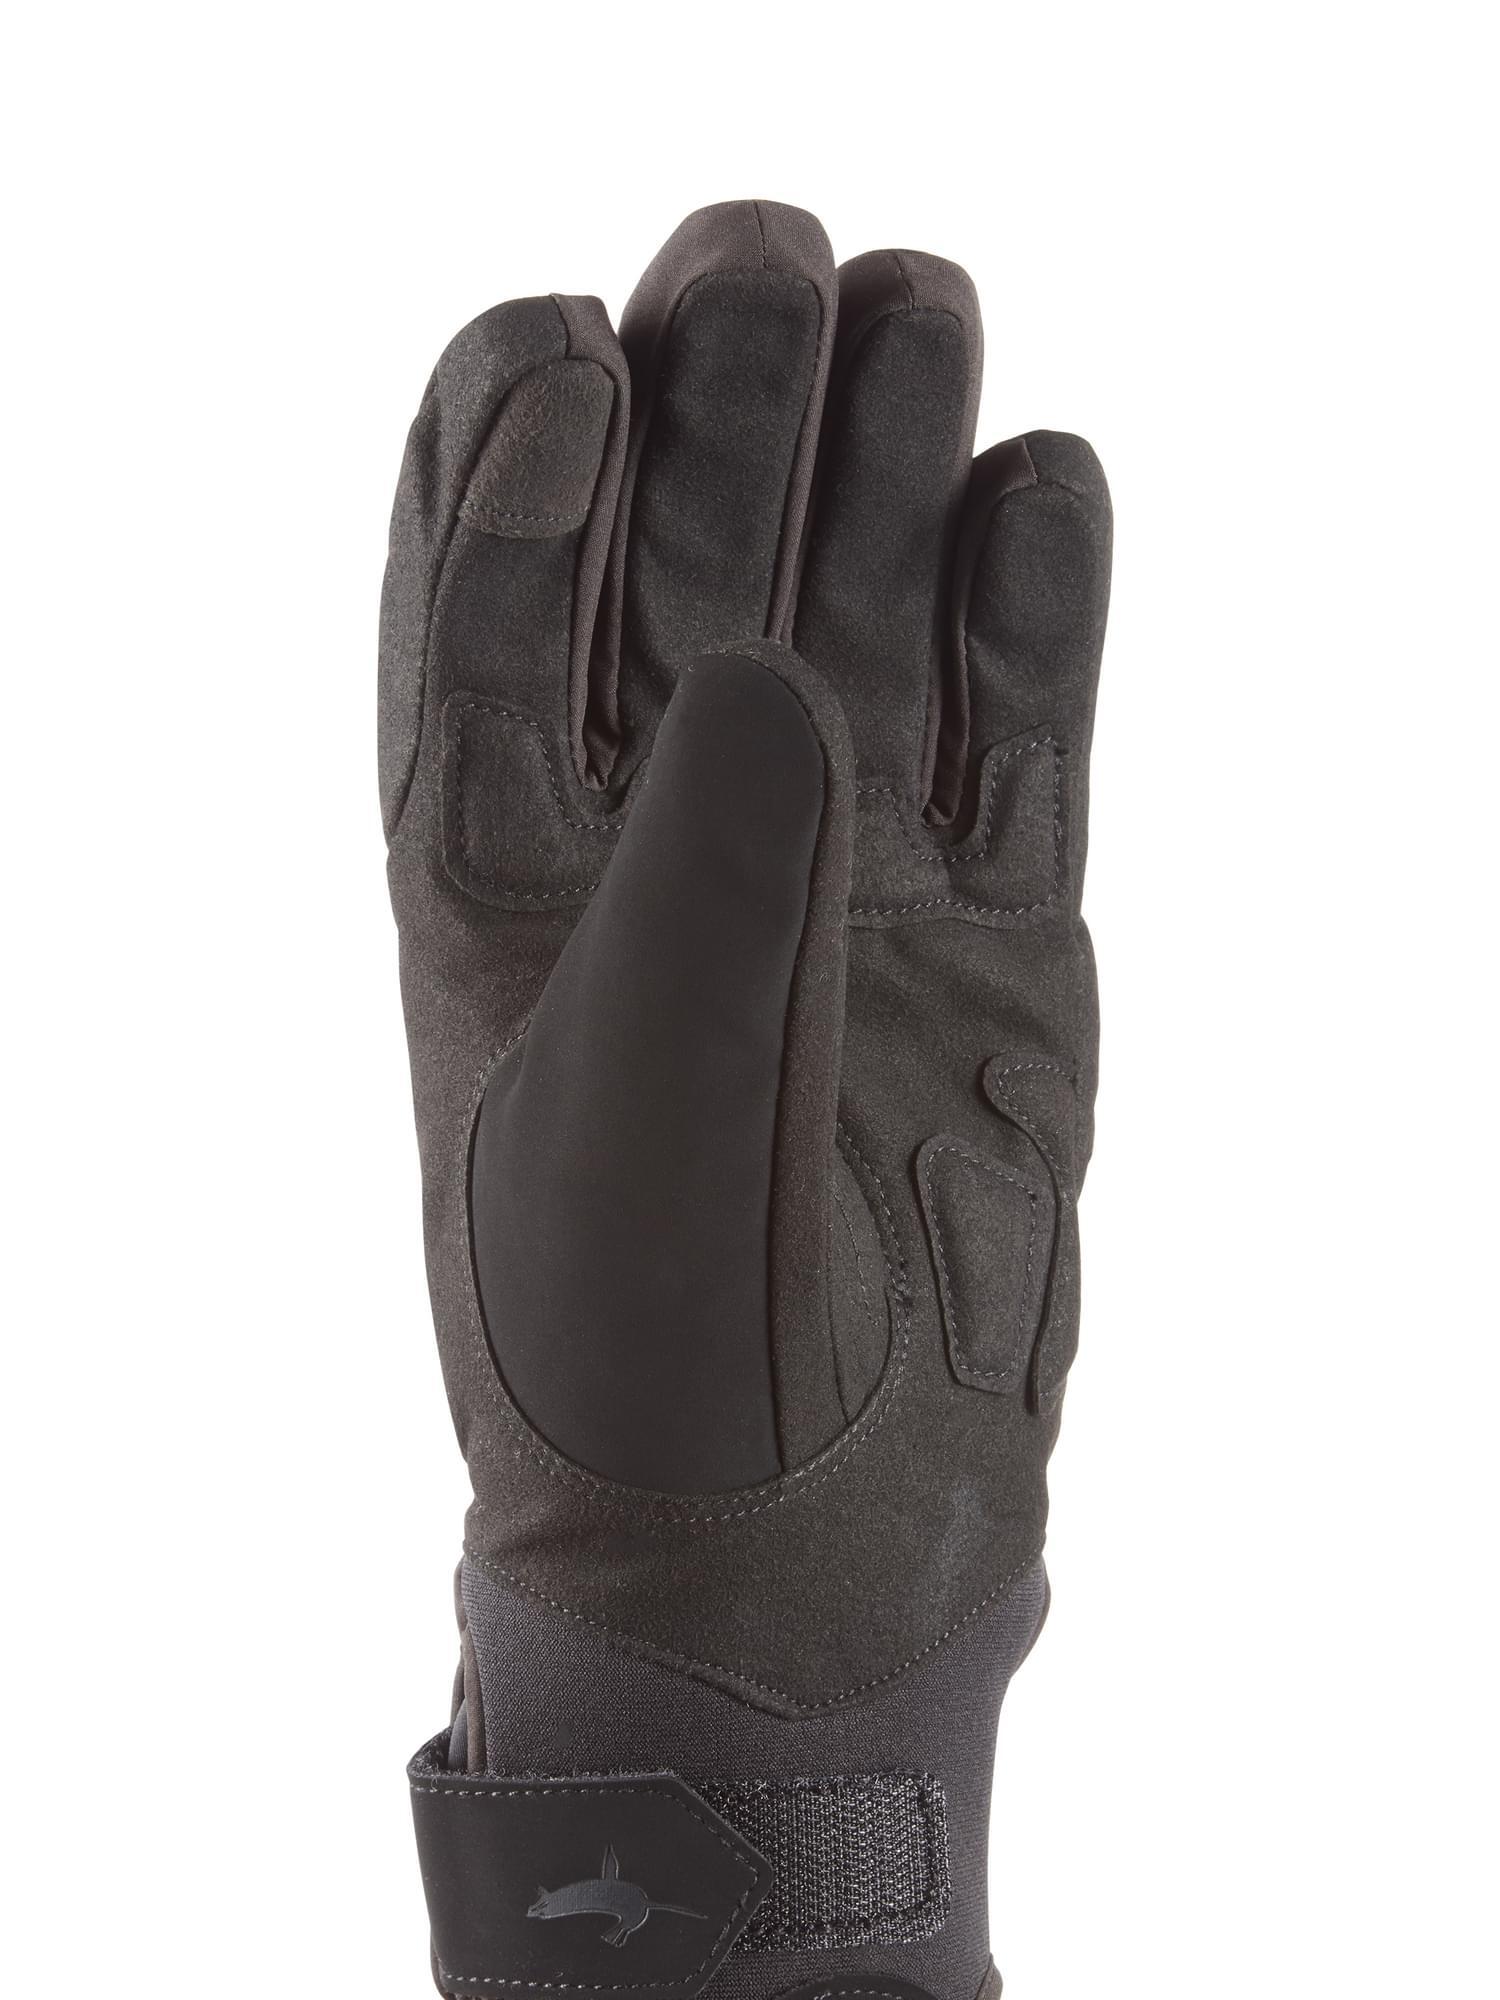 Mens Waterproof All Weather Cycle Gloves 2/3